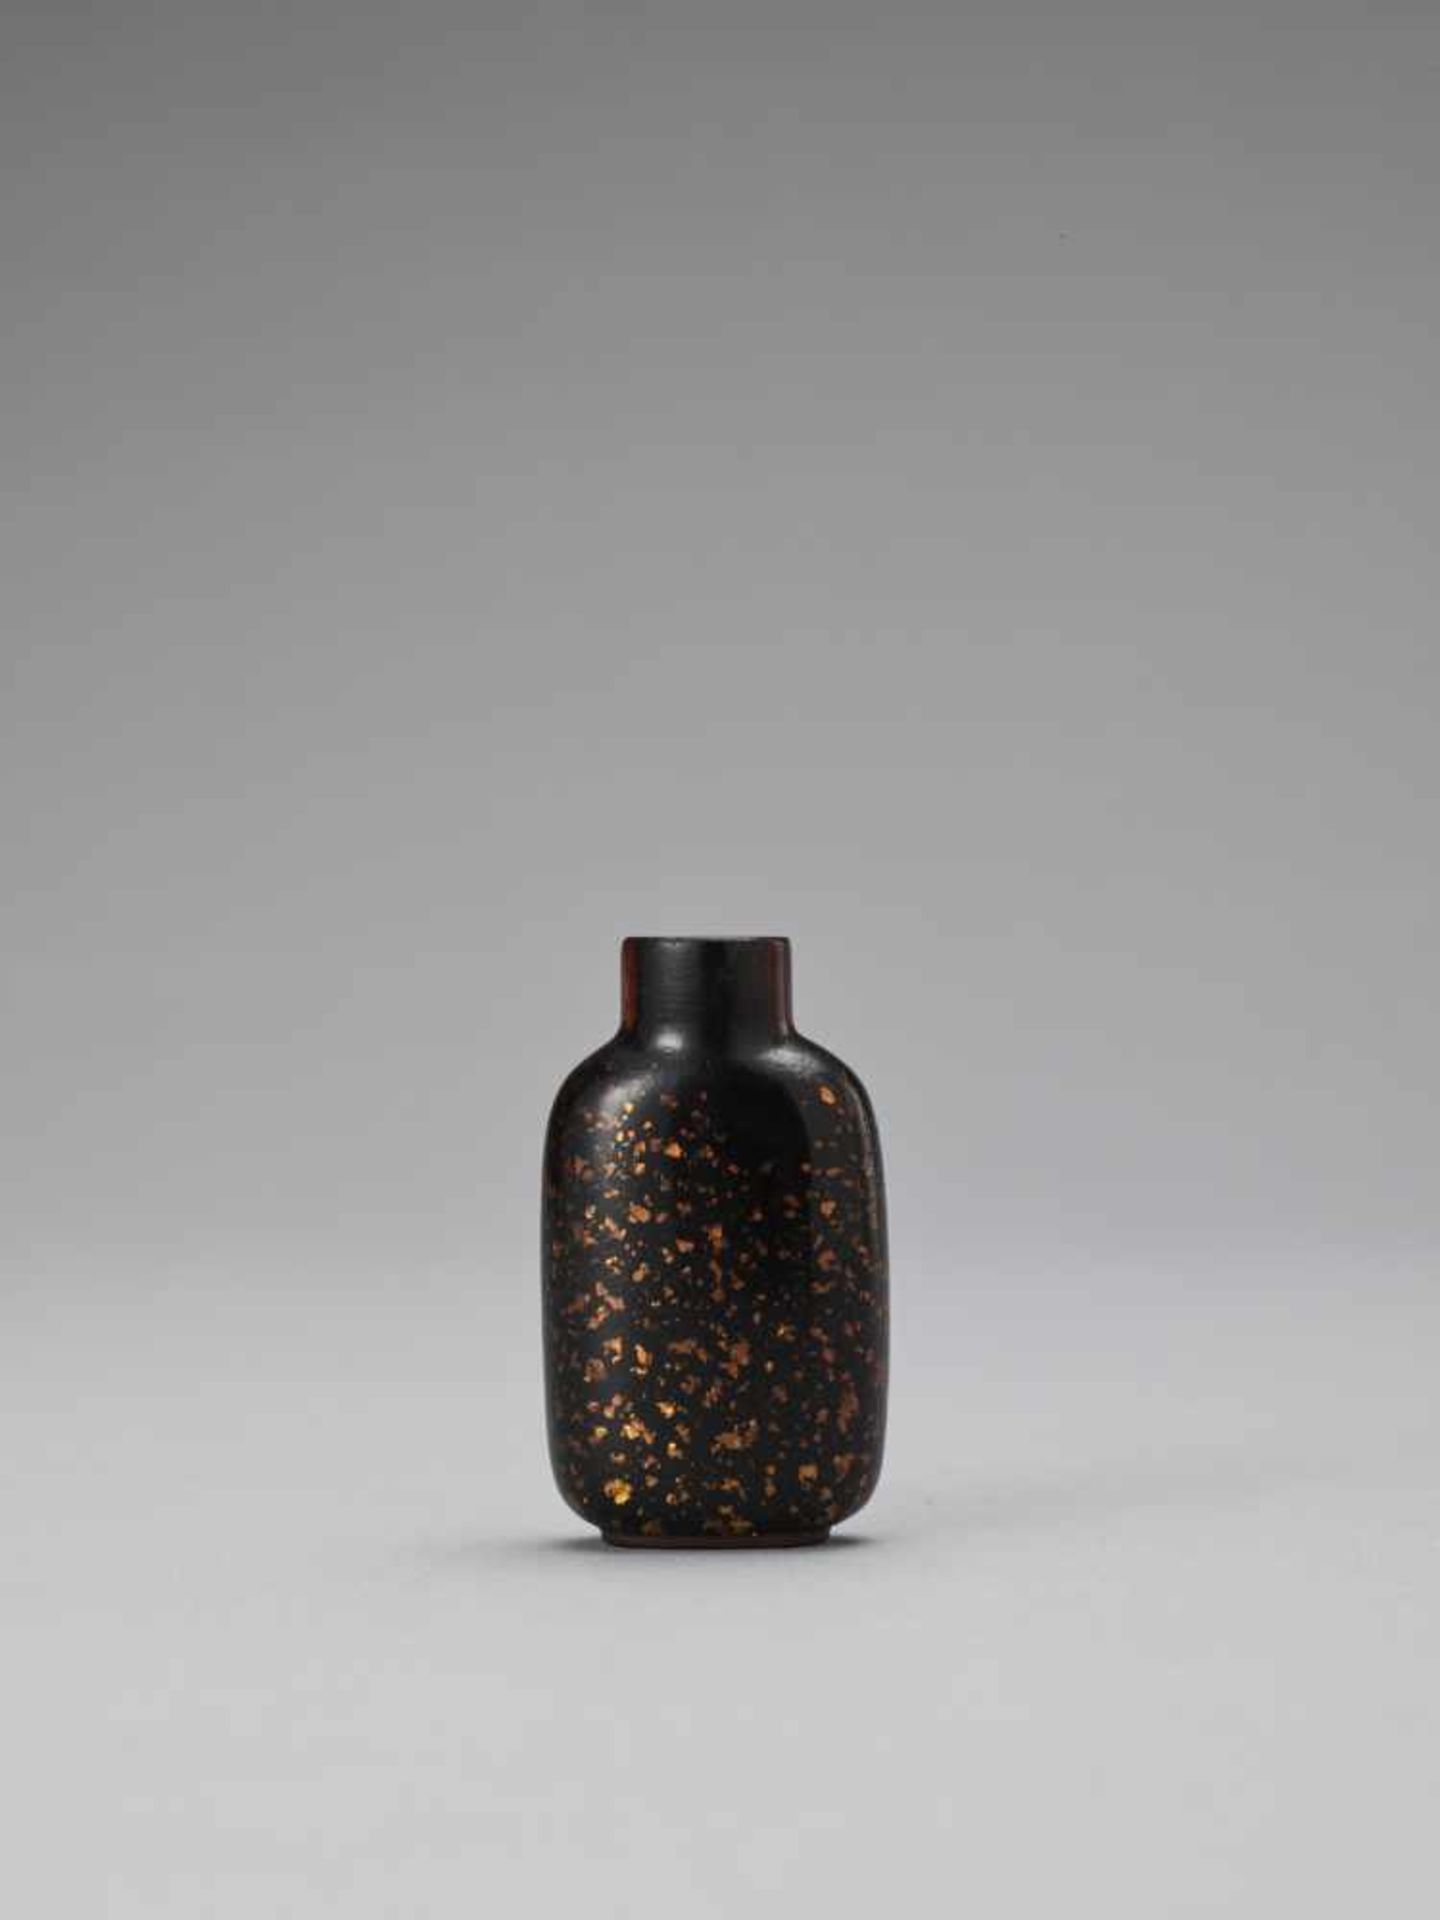 A GOLD-SPECKLED AMBER AVENTURINE GLASS SNUFF BOTTLE, QING - Image 3 of 6